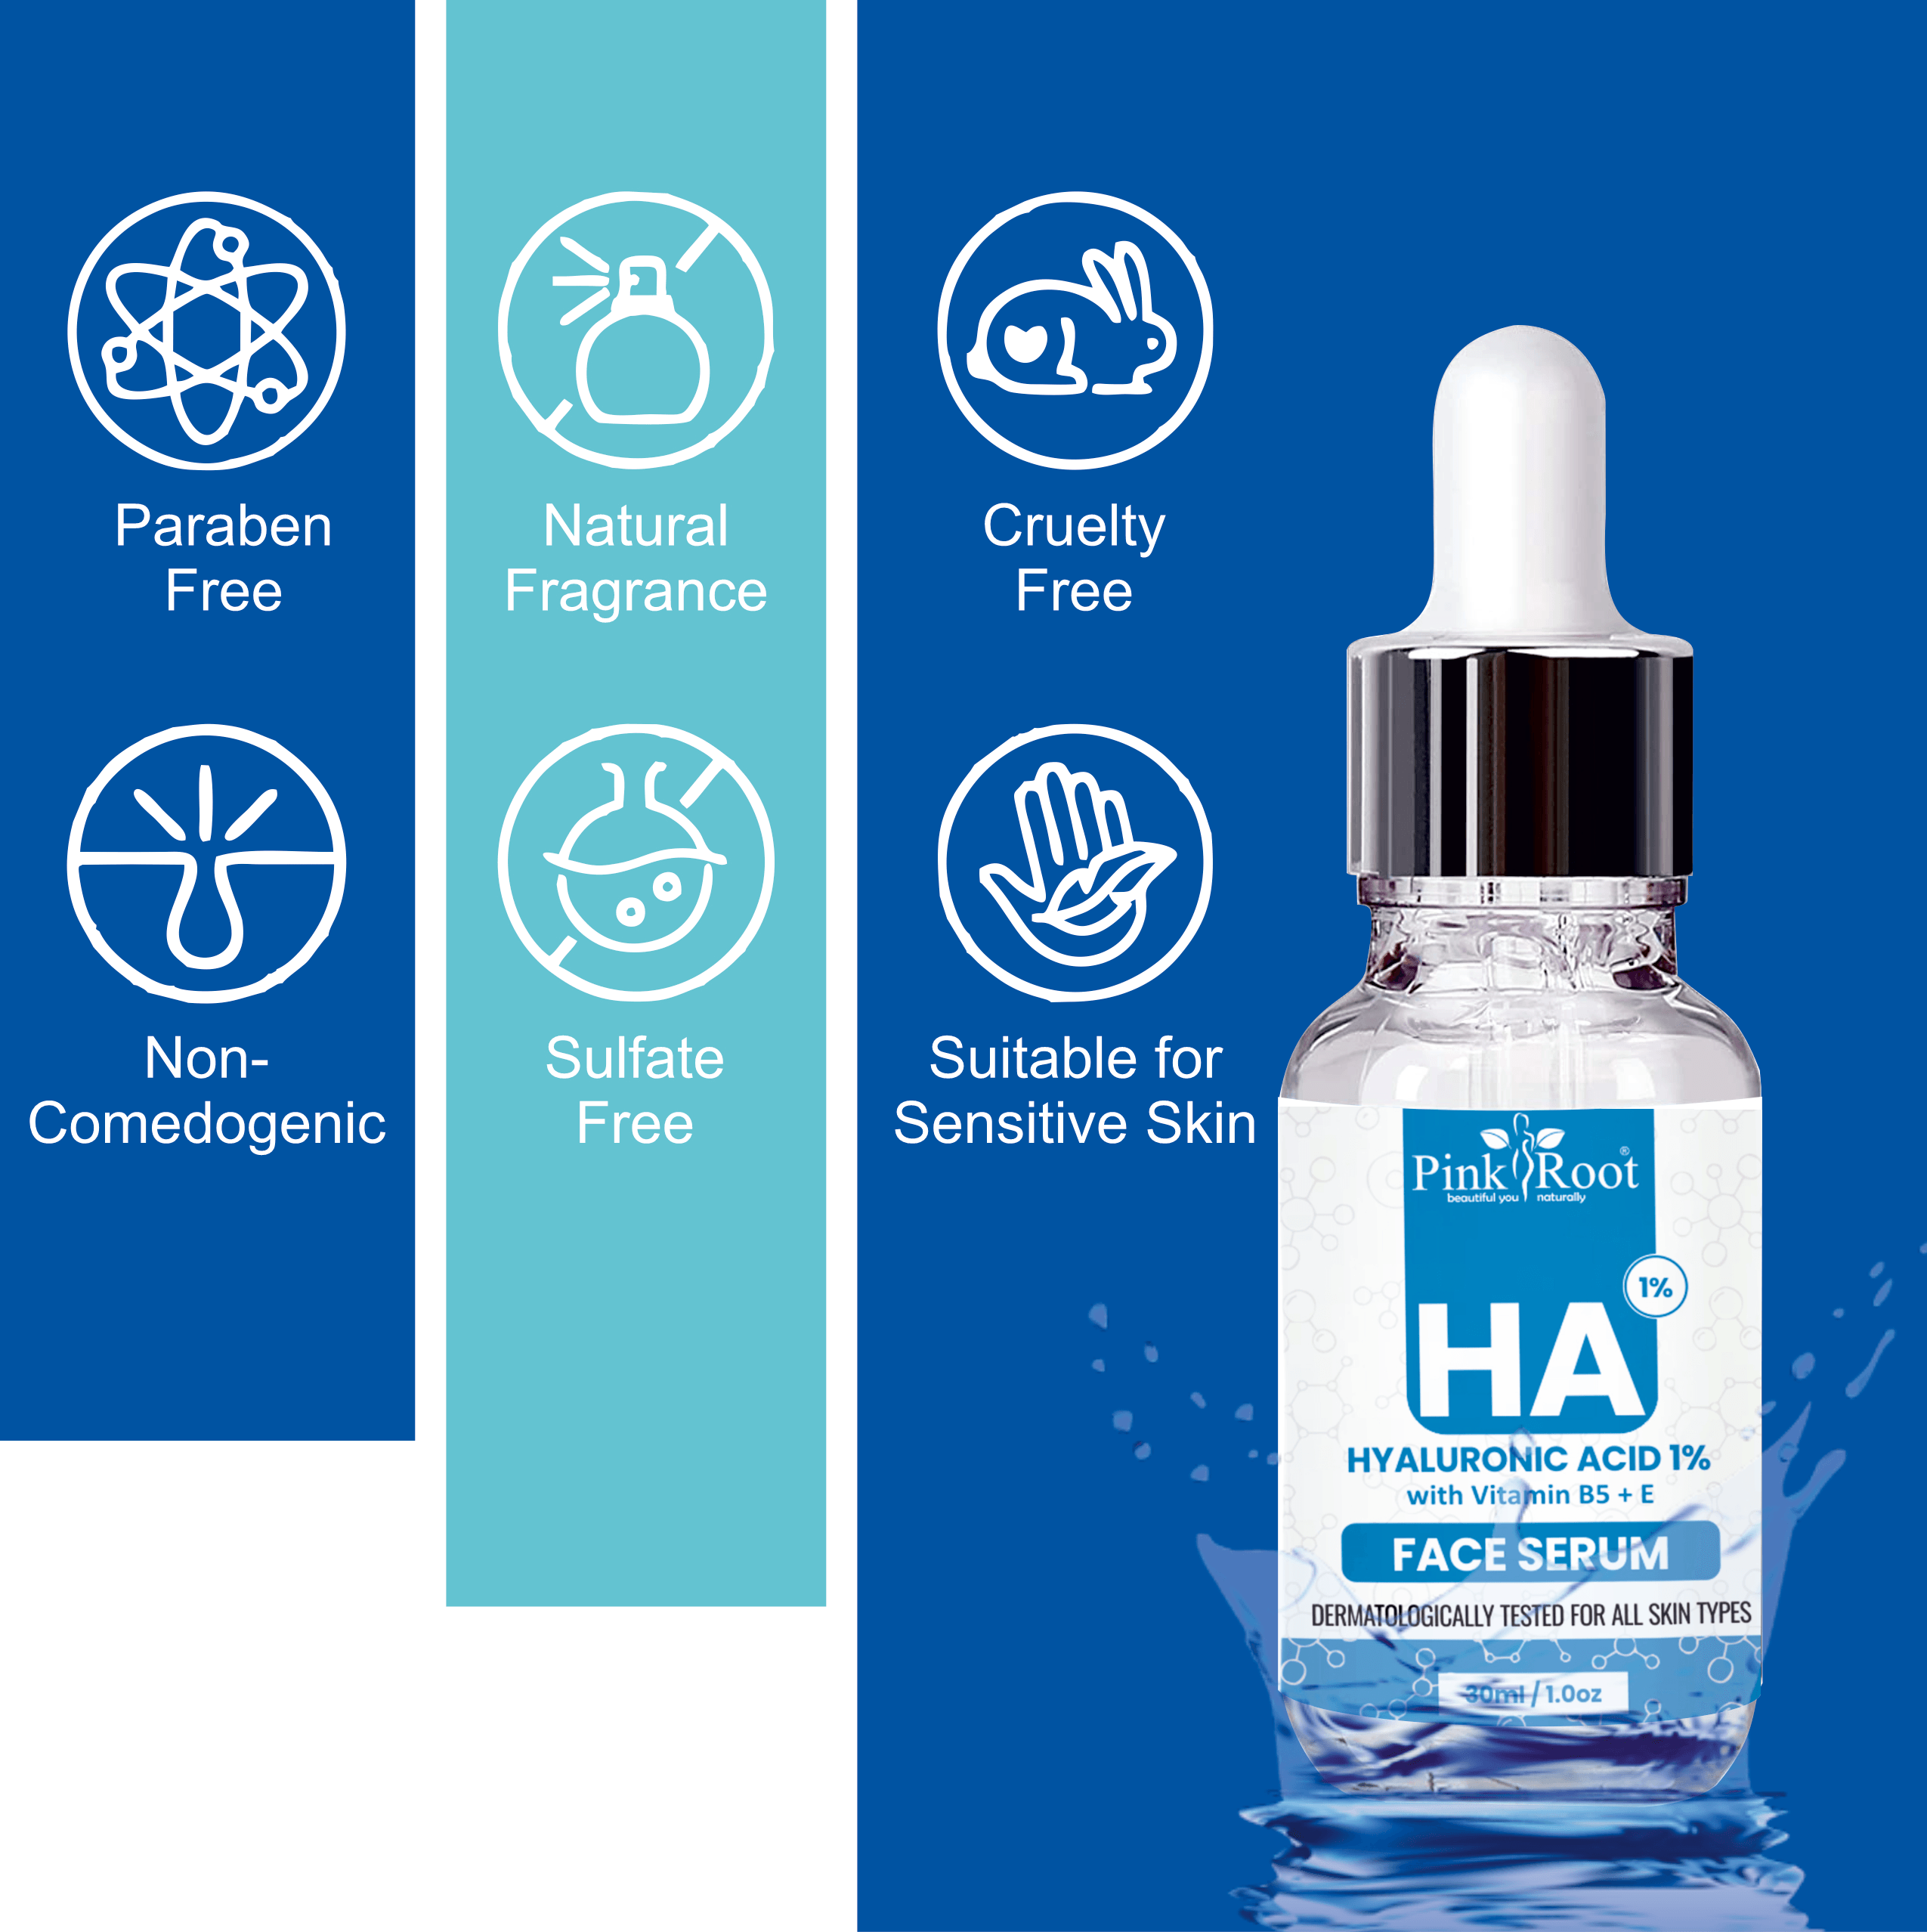 Hyaluronic Acid Face Serum 1% with Vitamin B5+E 30ml - Pink Root